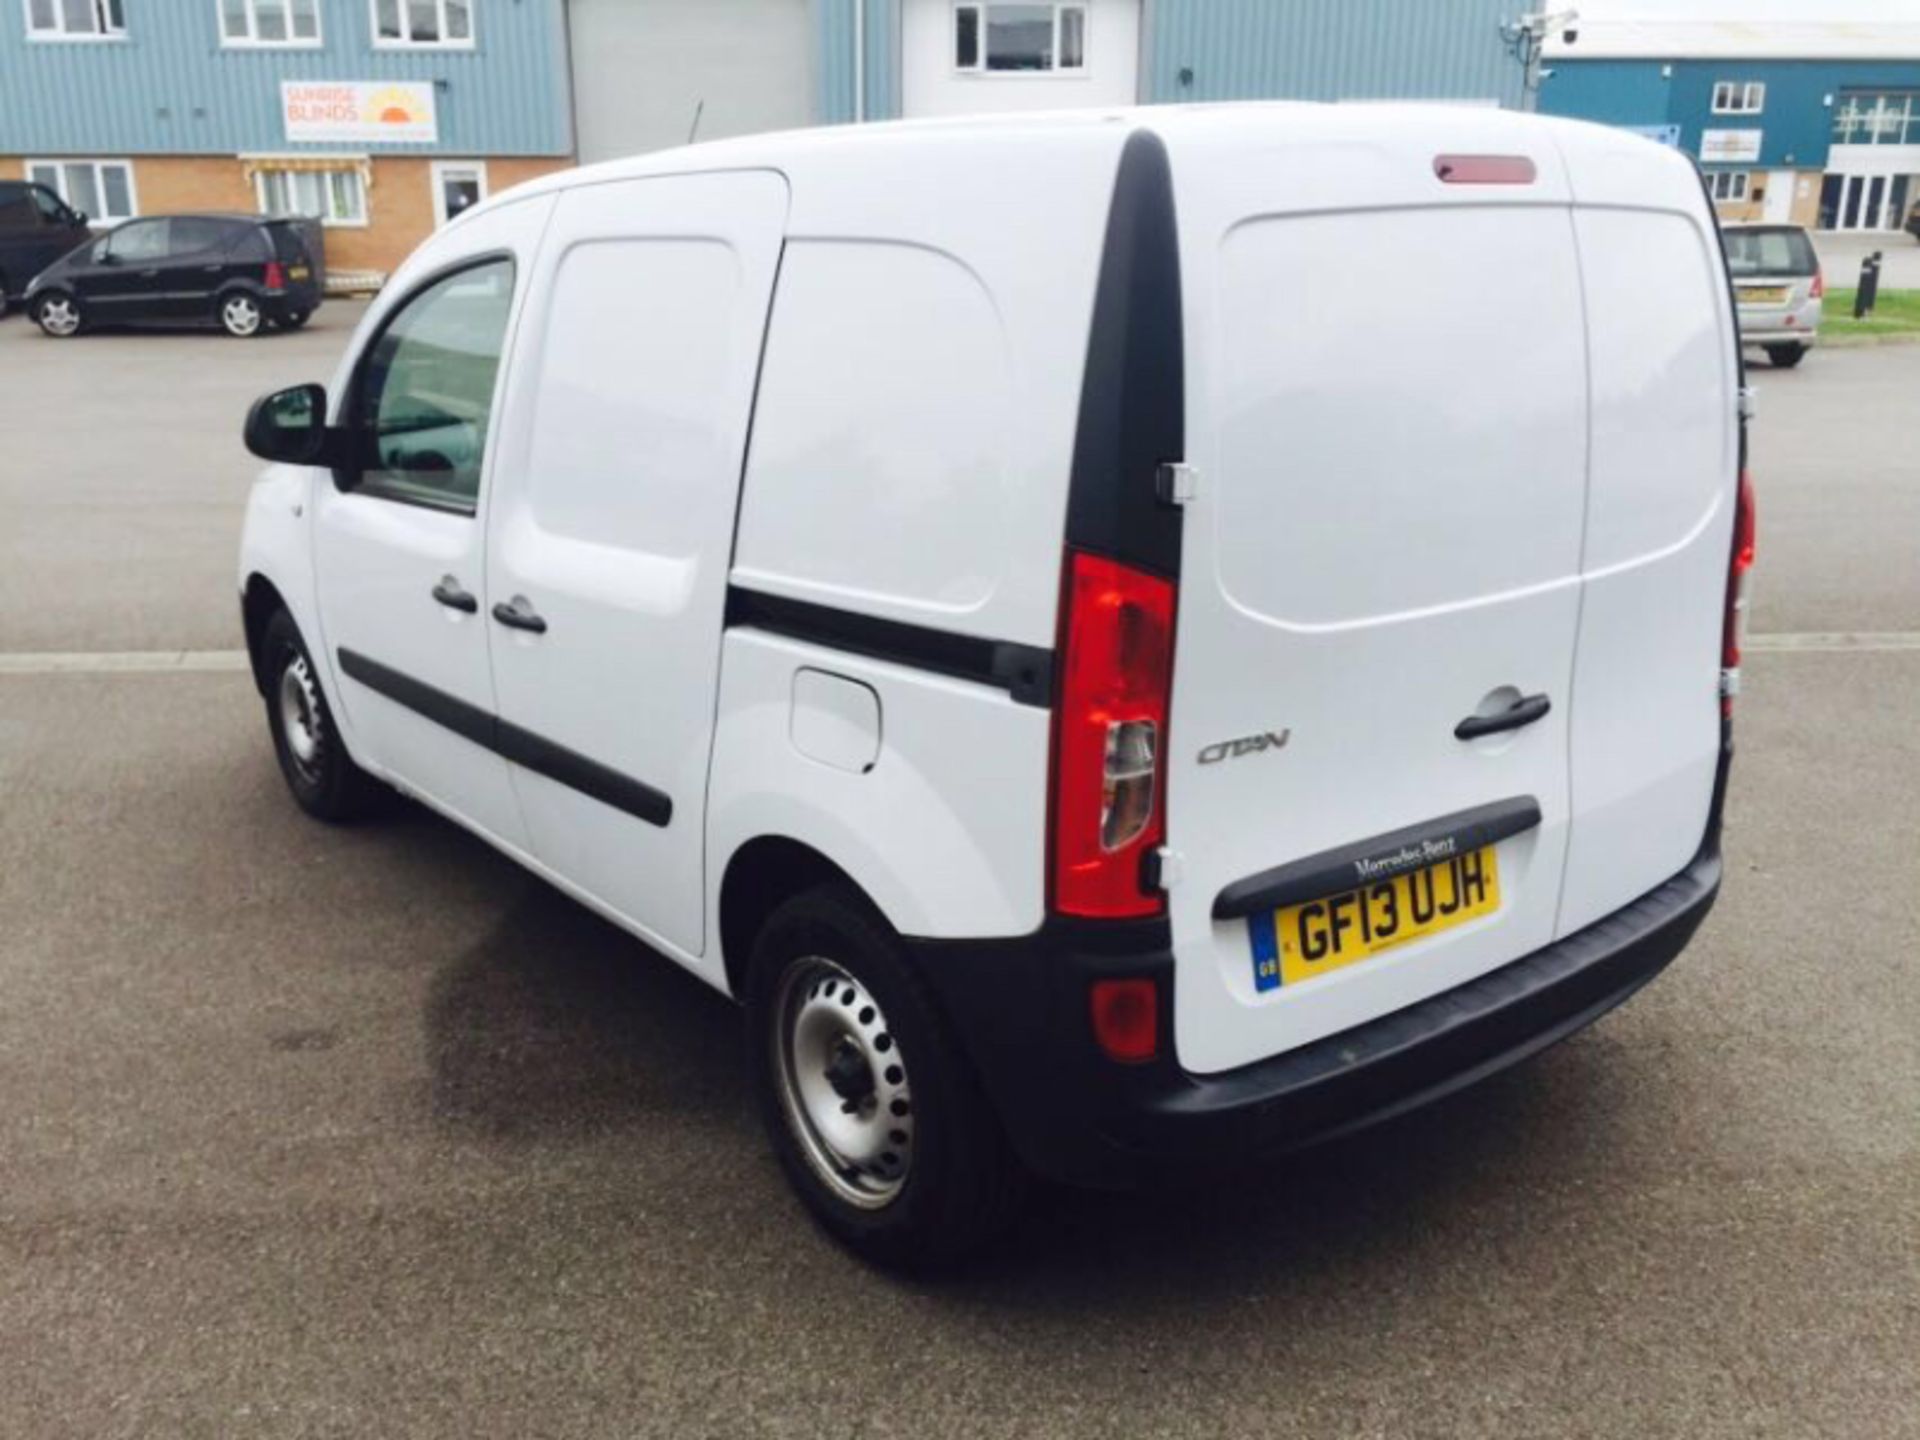 (0N SALE)MERCEDES - BENZ CITAN 109CDI - LONG WHEEL BASE - 1 OWNER FROM NEW - ELEC PACK - GREAT SPEC! - Image 4 of 11